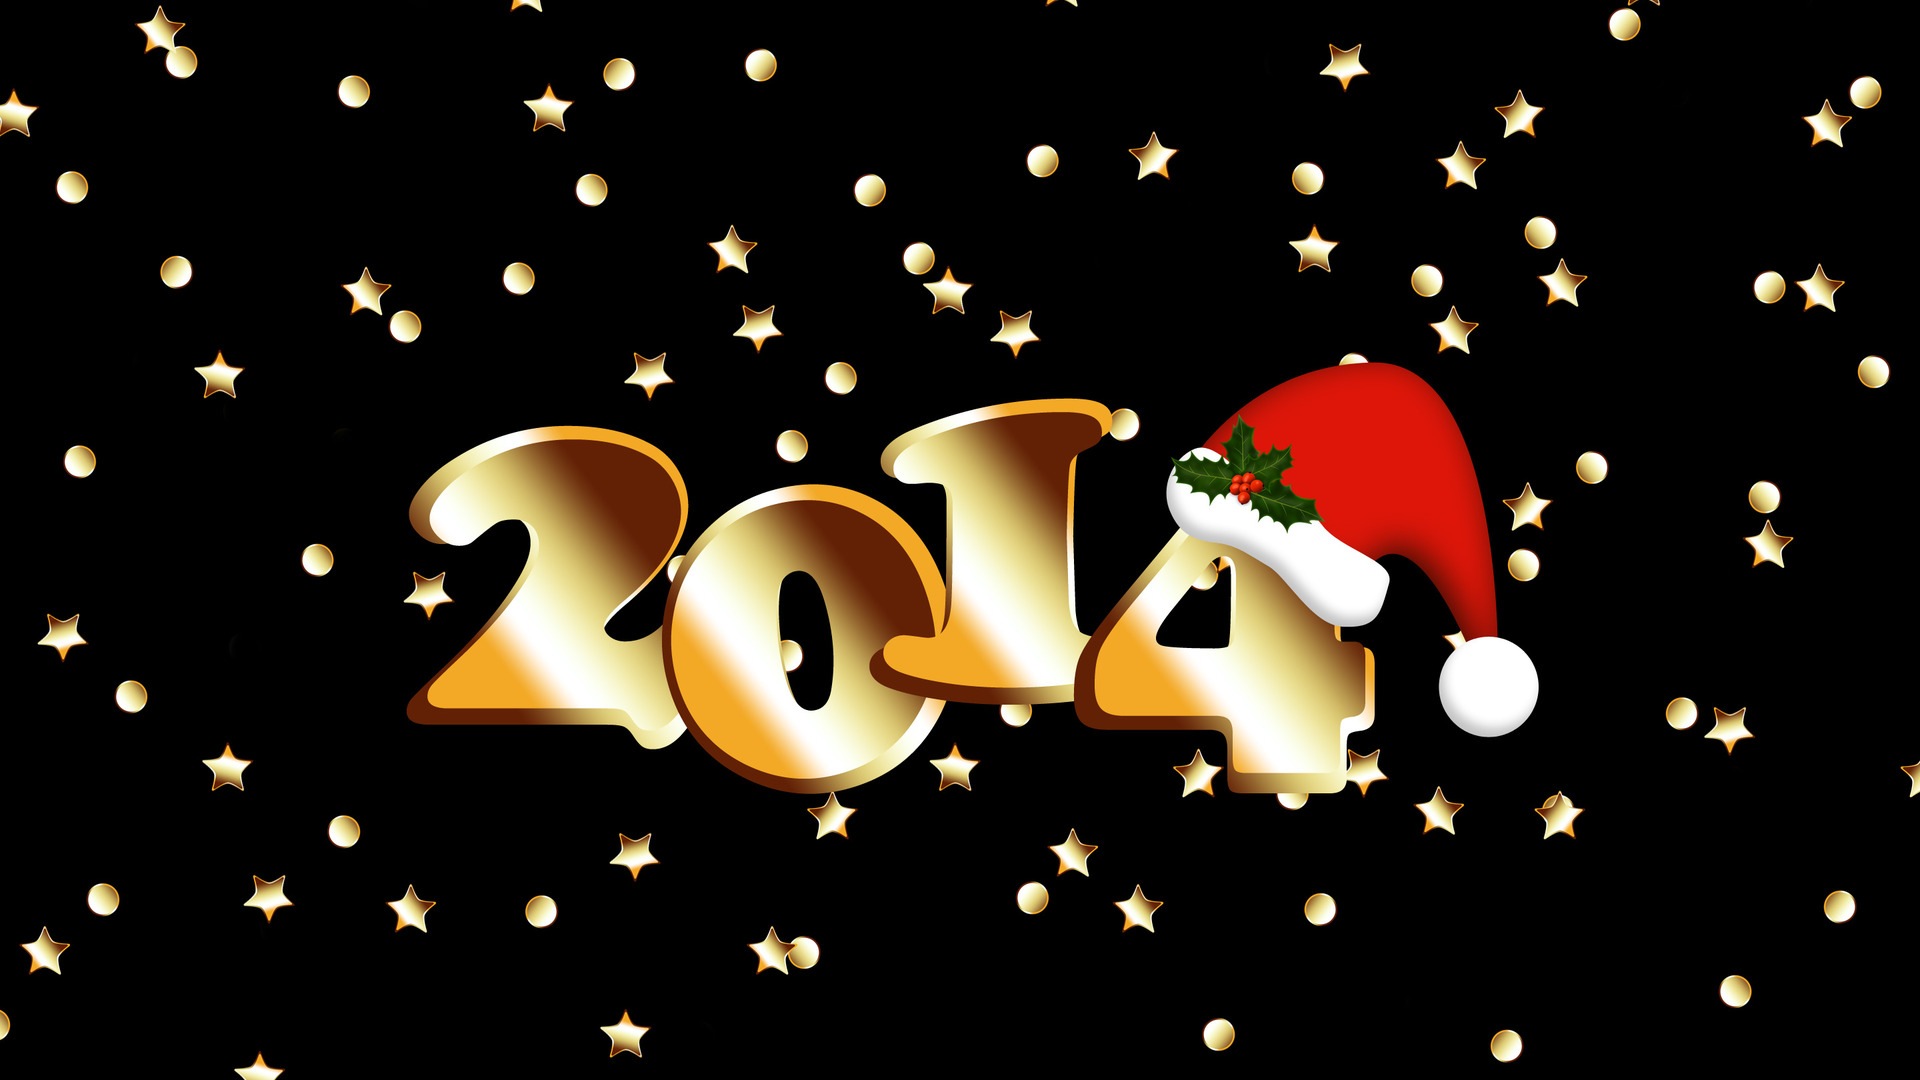 2014 New Year Theme HD Wallpapers (1) #15 - 1920x1080